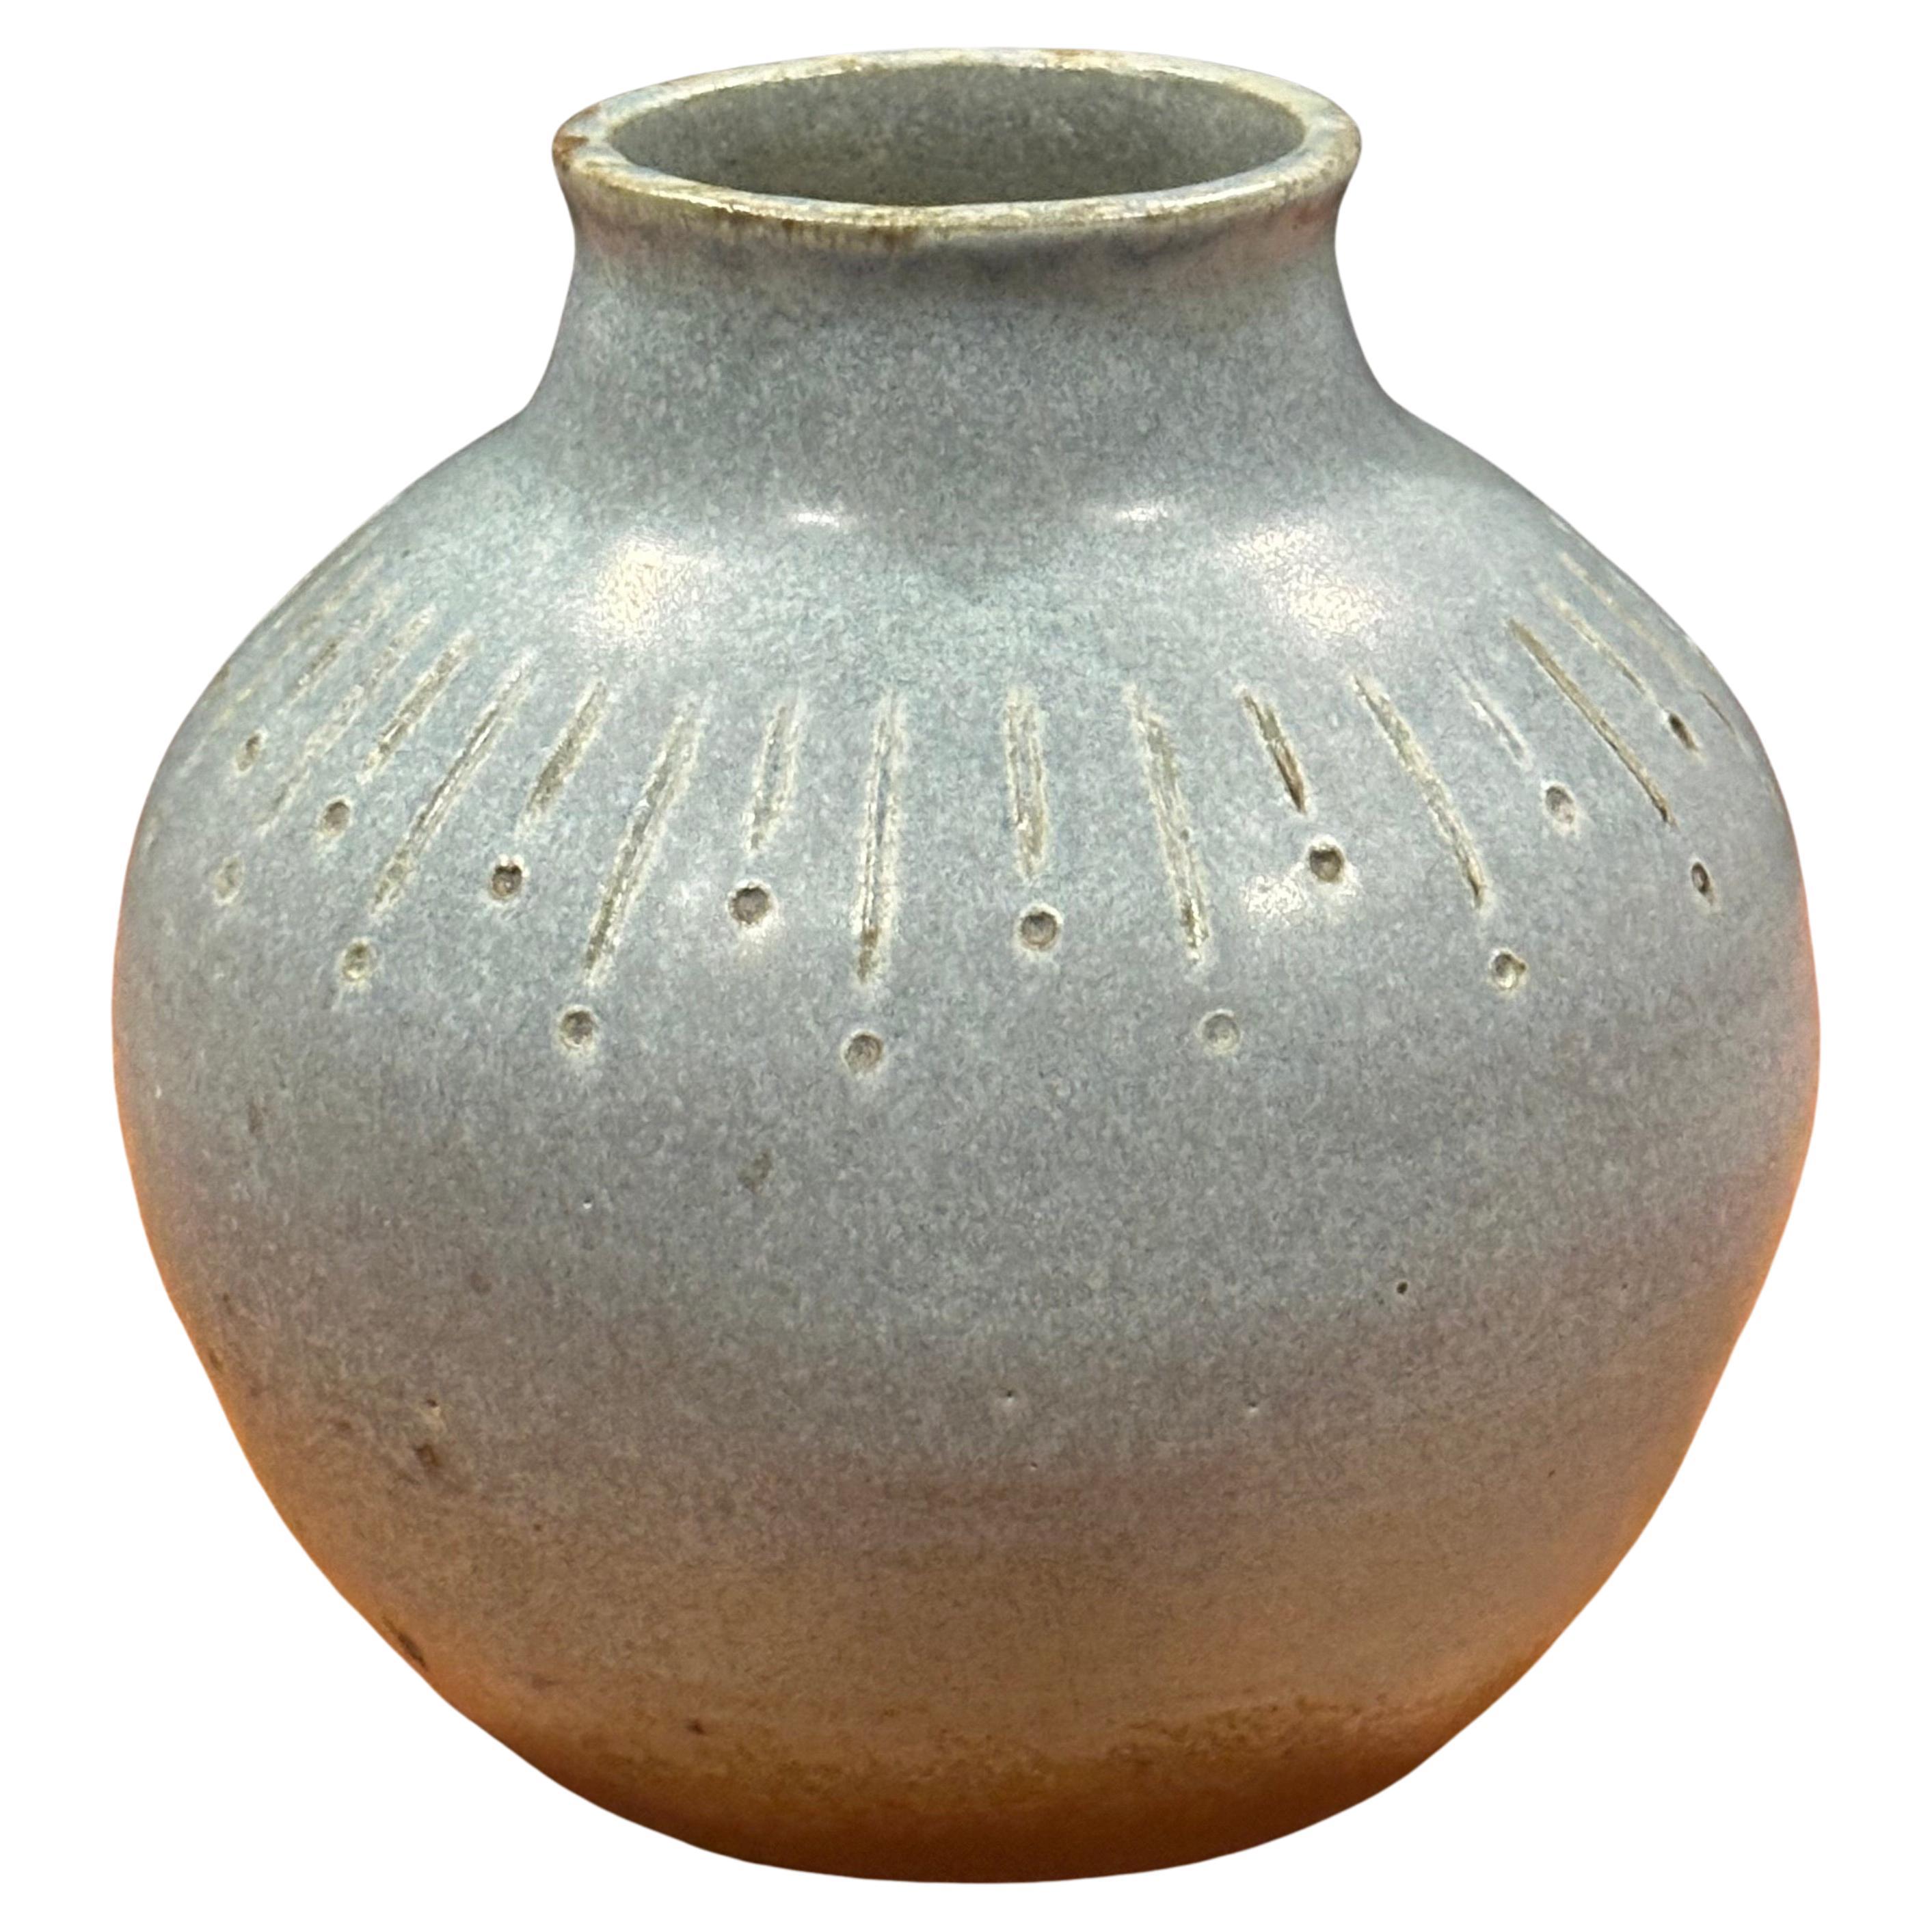 Mid-Century signed California studio pottery vase, circa 1967. The vase is in very good vintage with no chips or cracks and measures 5.75